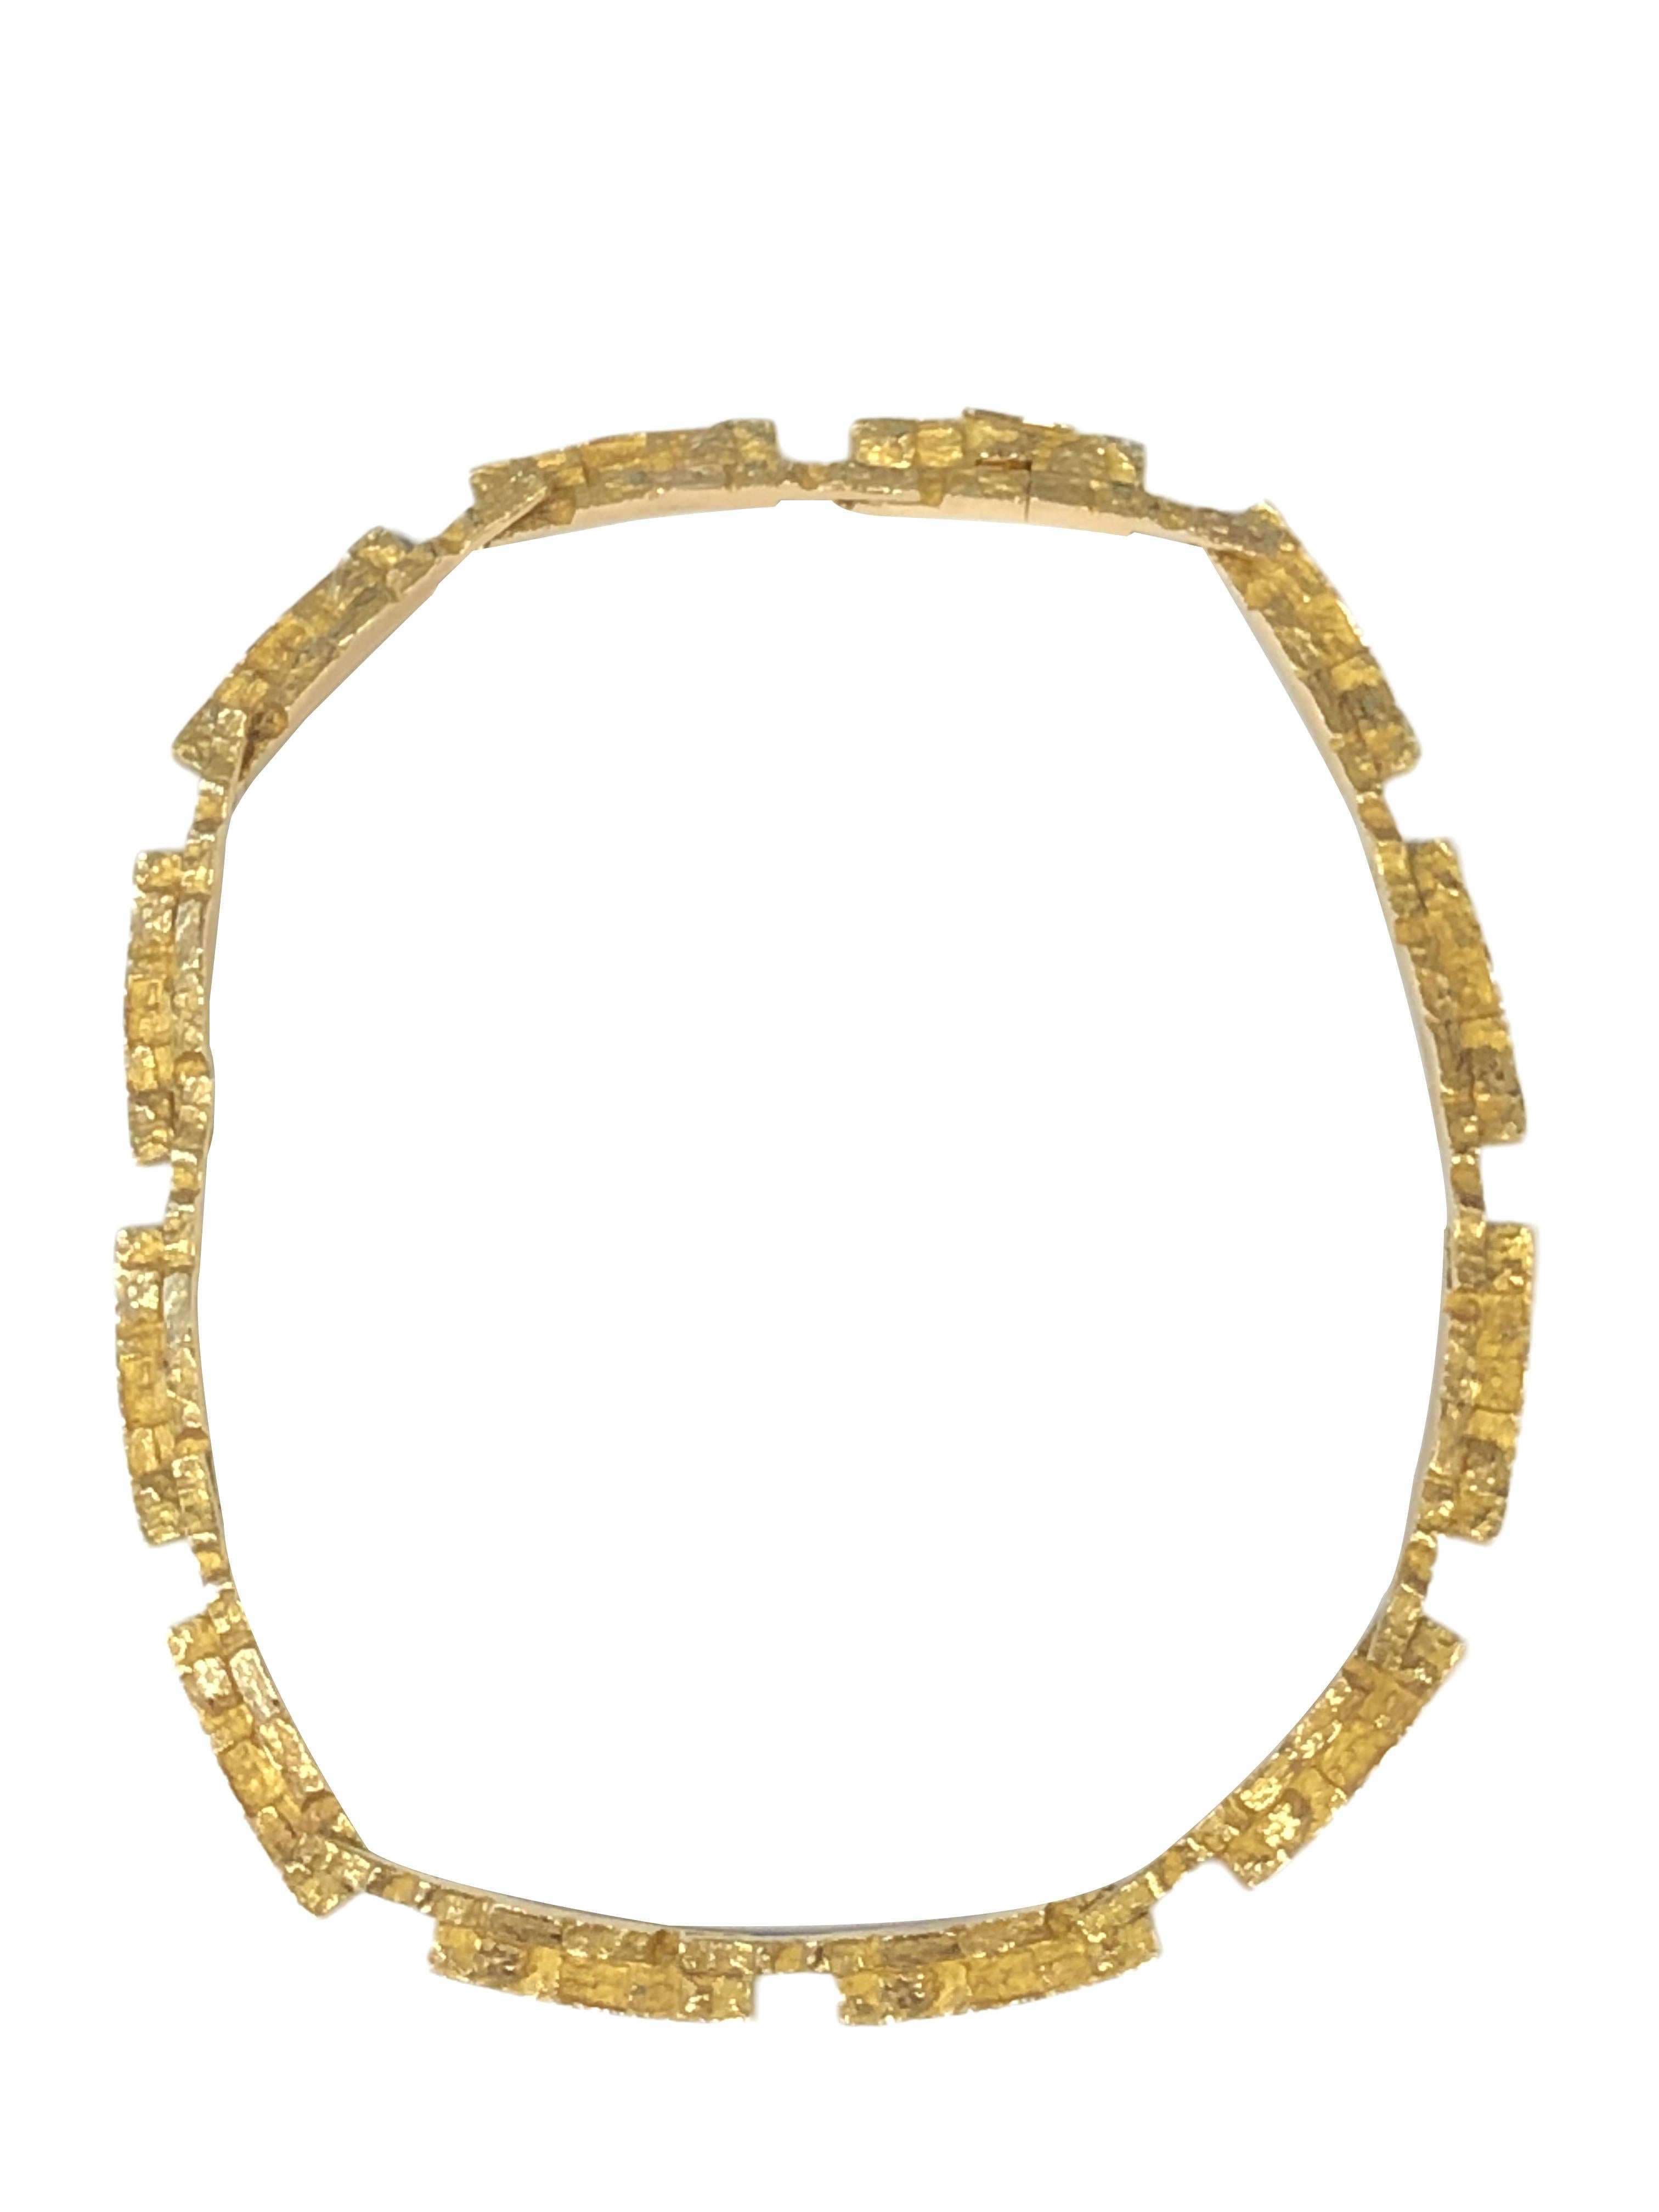 Bjorn Weckstrom for Lapponia Yellow Gold 1968 Mid-Century Modern Necklace 2